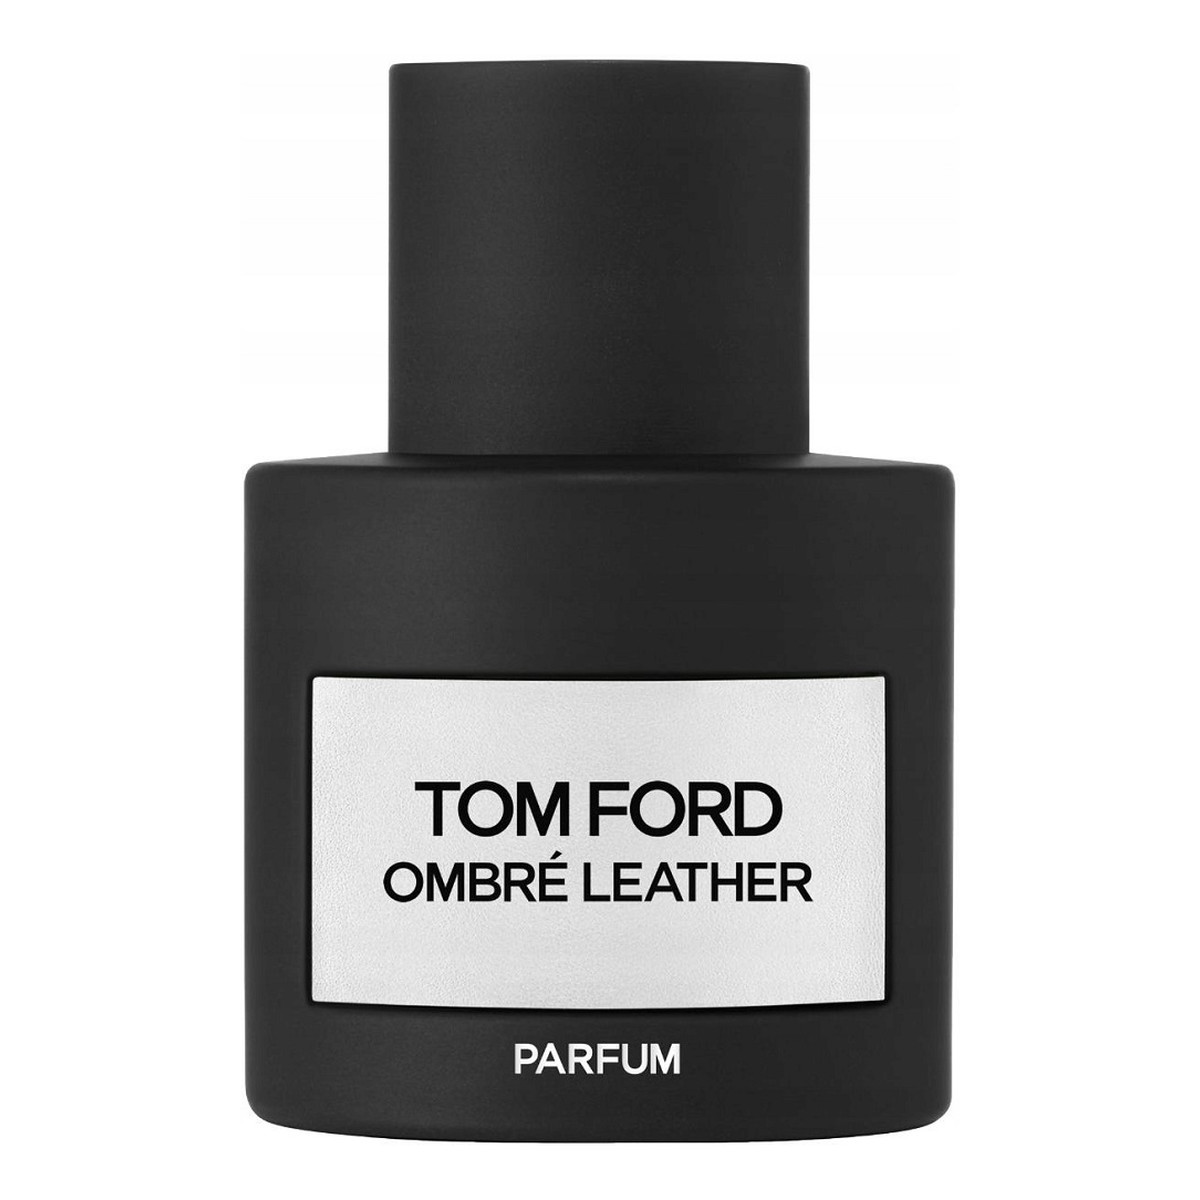 Tom Ford Ombre Leather Perfumy spray 50ml